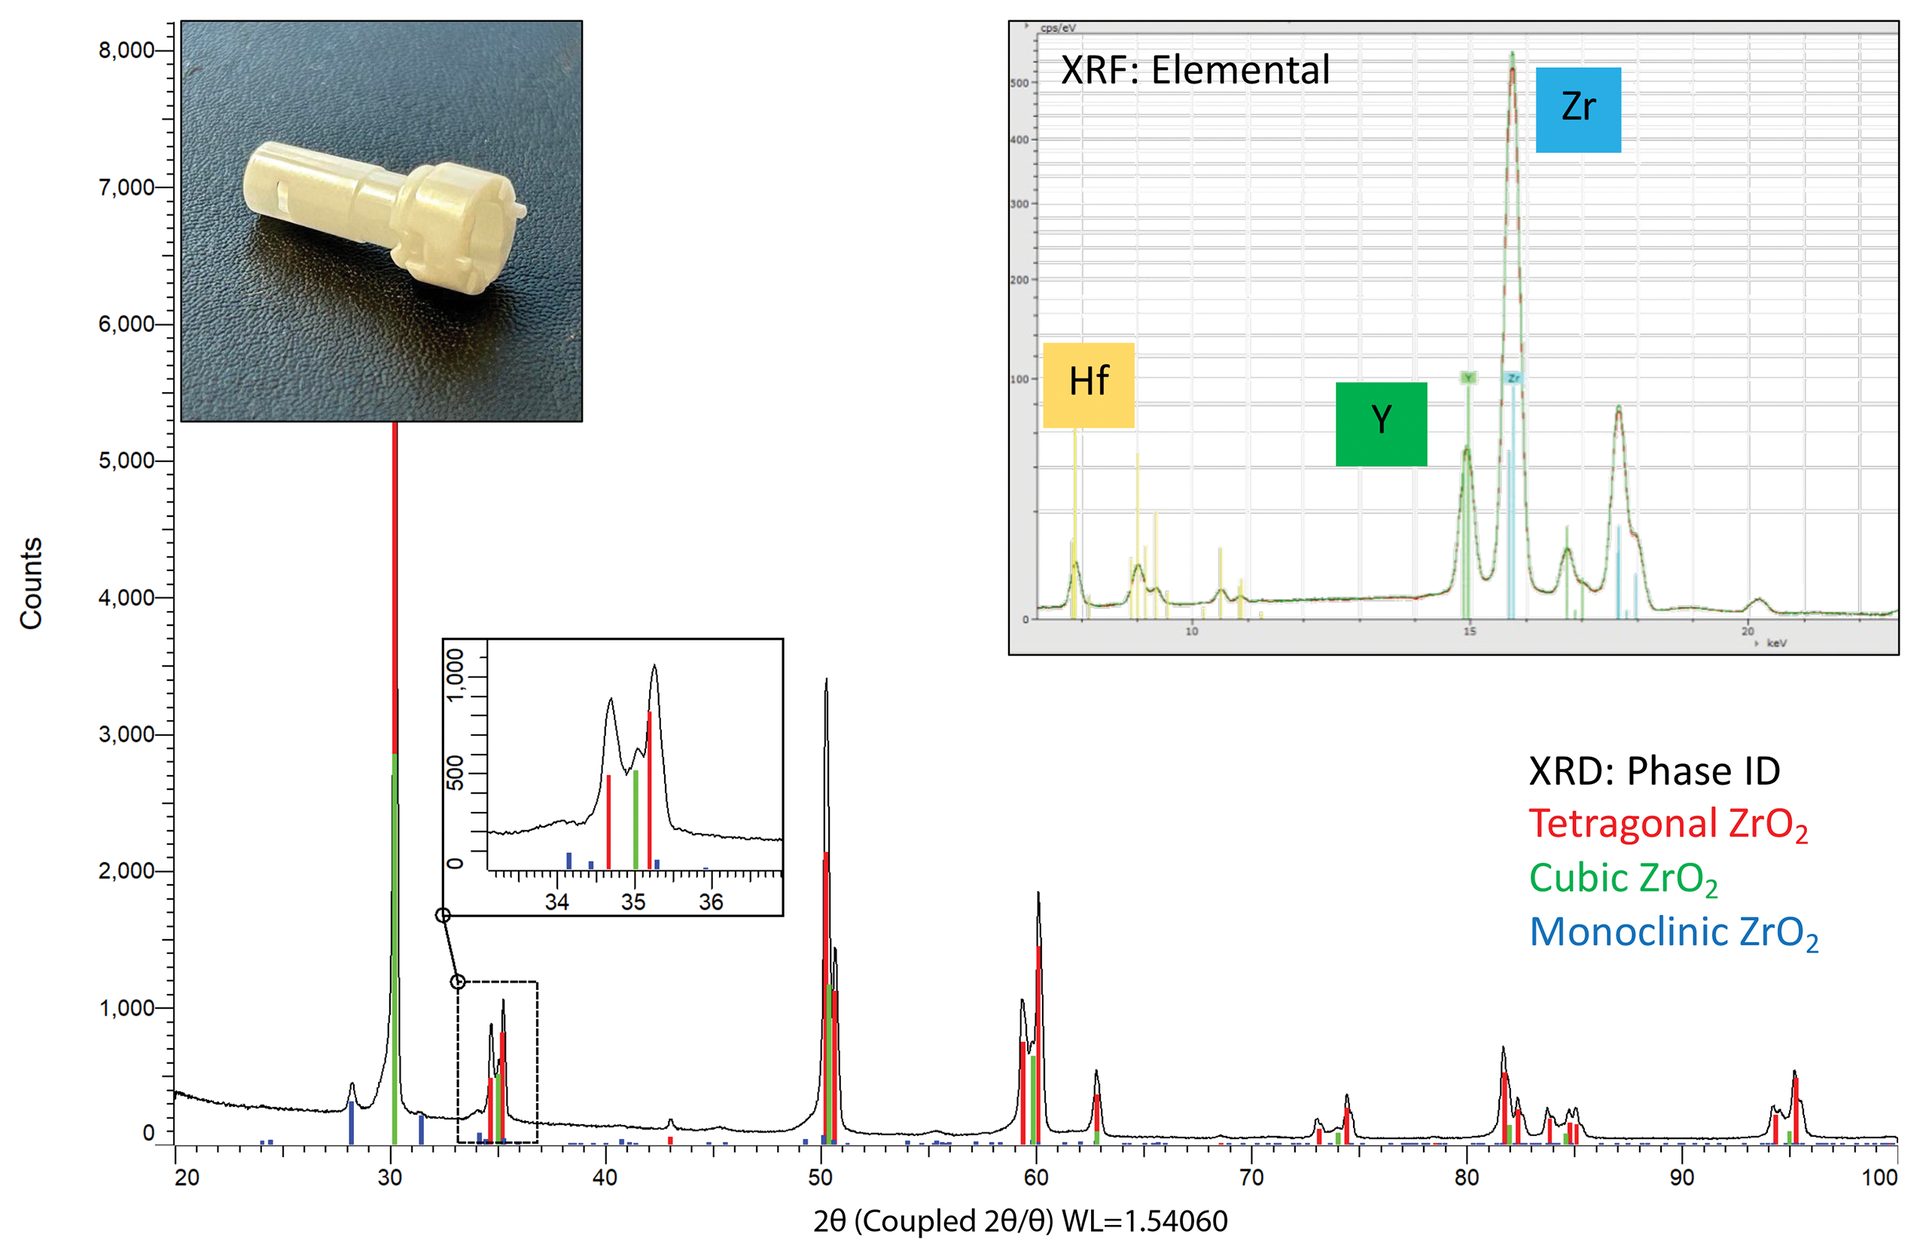 Elemental analysis of a ceramic fitting. Zirconium (Zr) is identified as the major element with yttrium (Y) and hafnium (Hf)